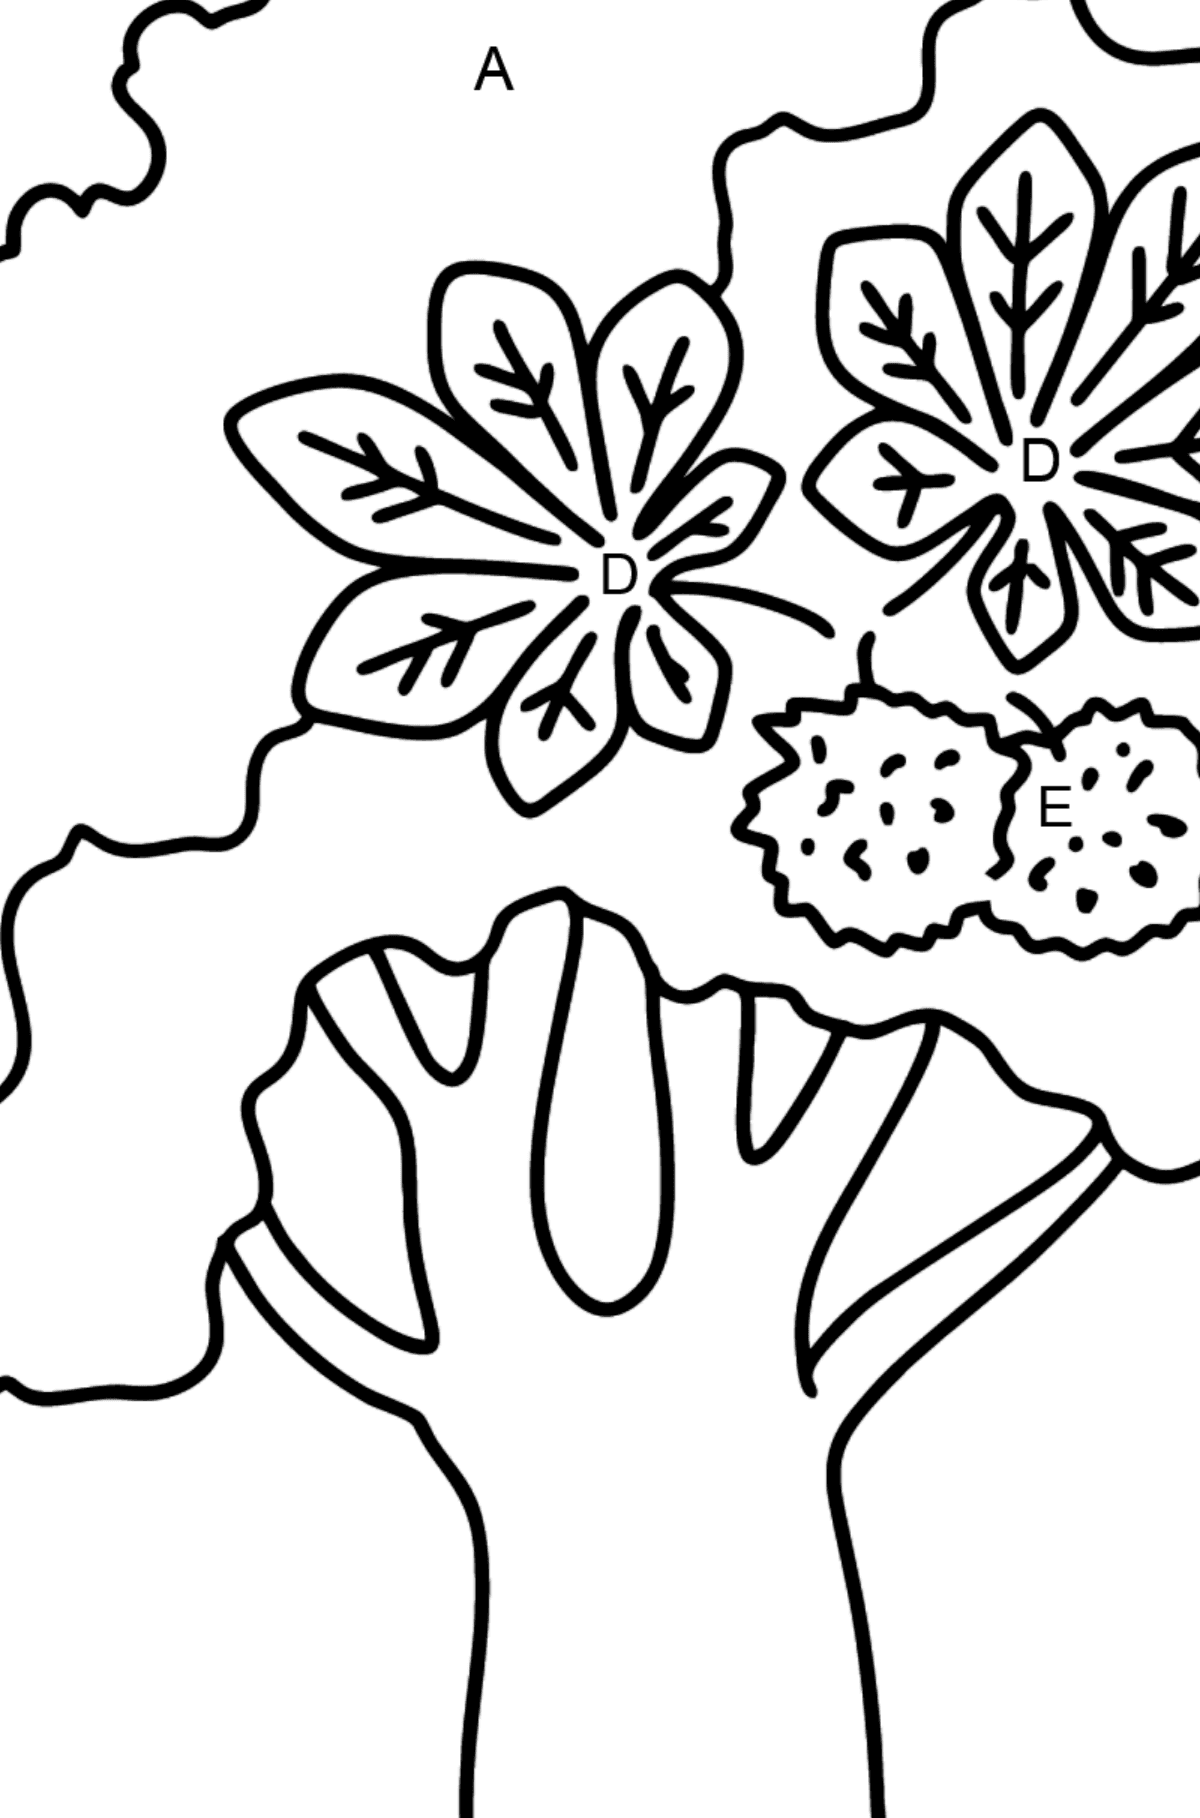 Chestnut coloring page - Coloring by Letters for Kids